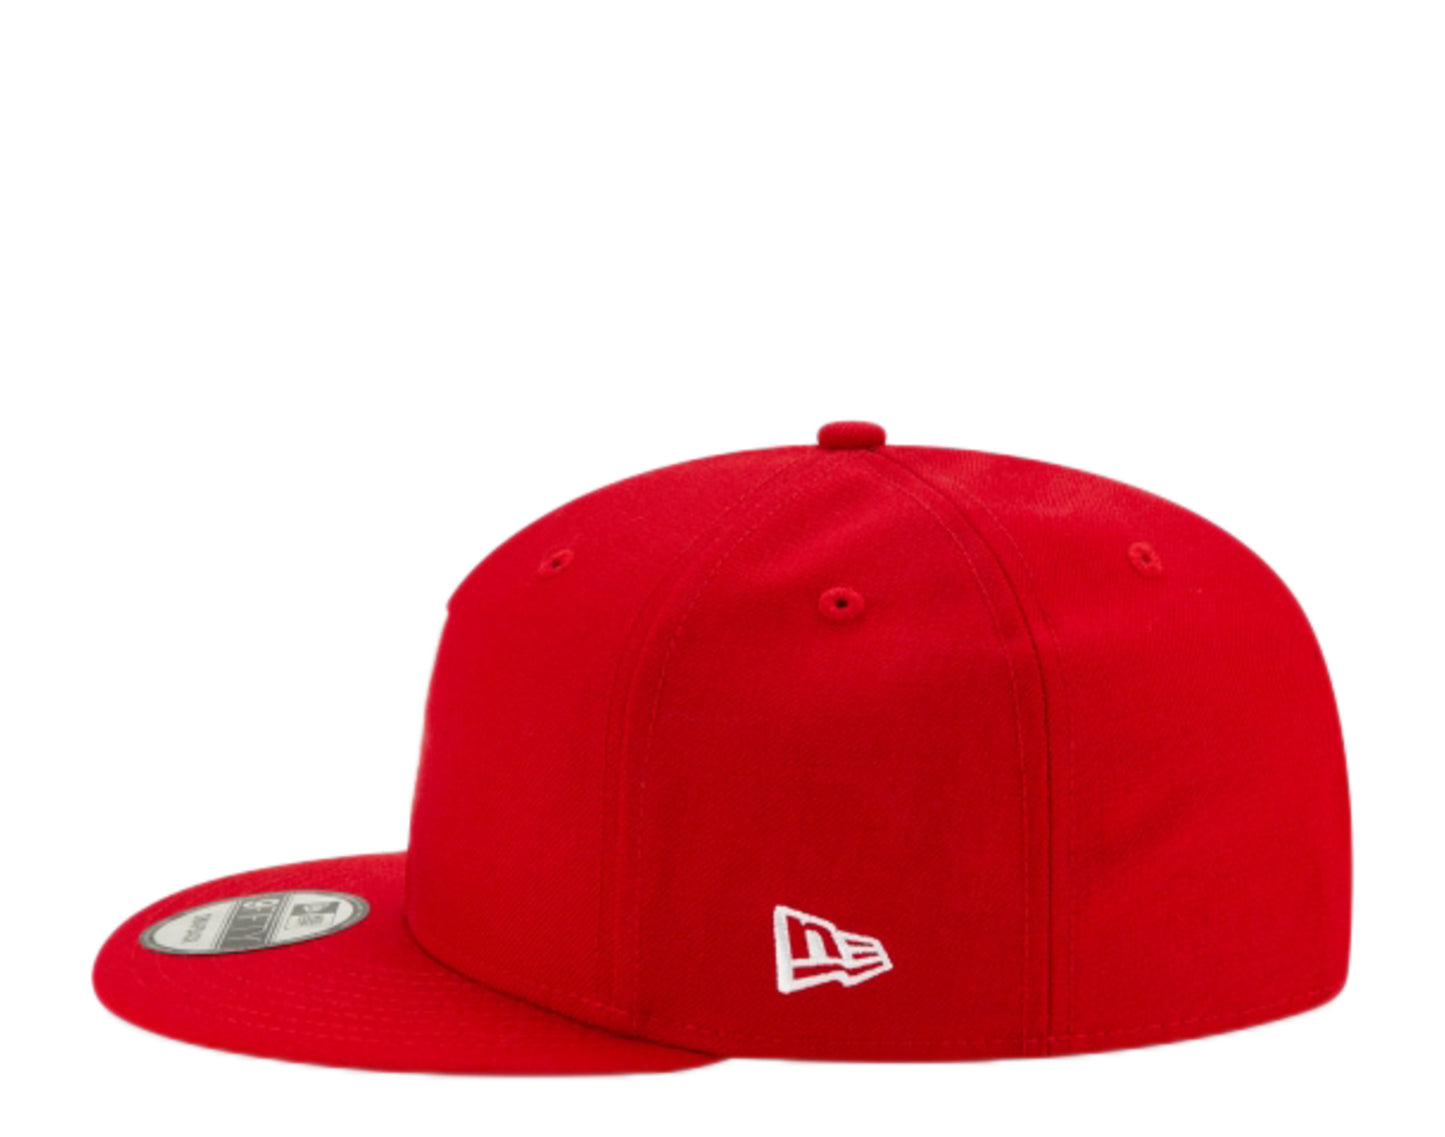 New Era X Compound 9Fifty - 7 - Red/White Snapback Hat 12485827